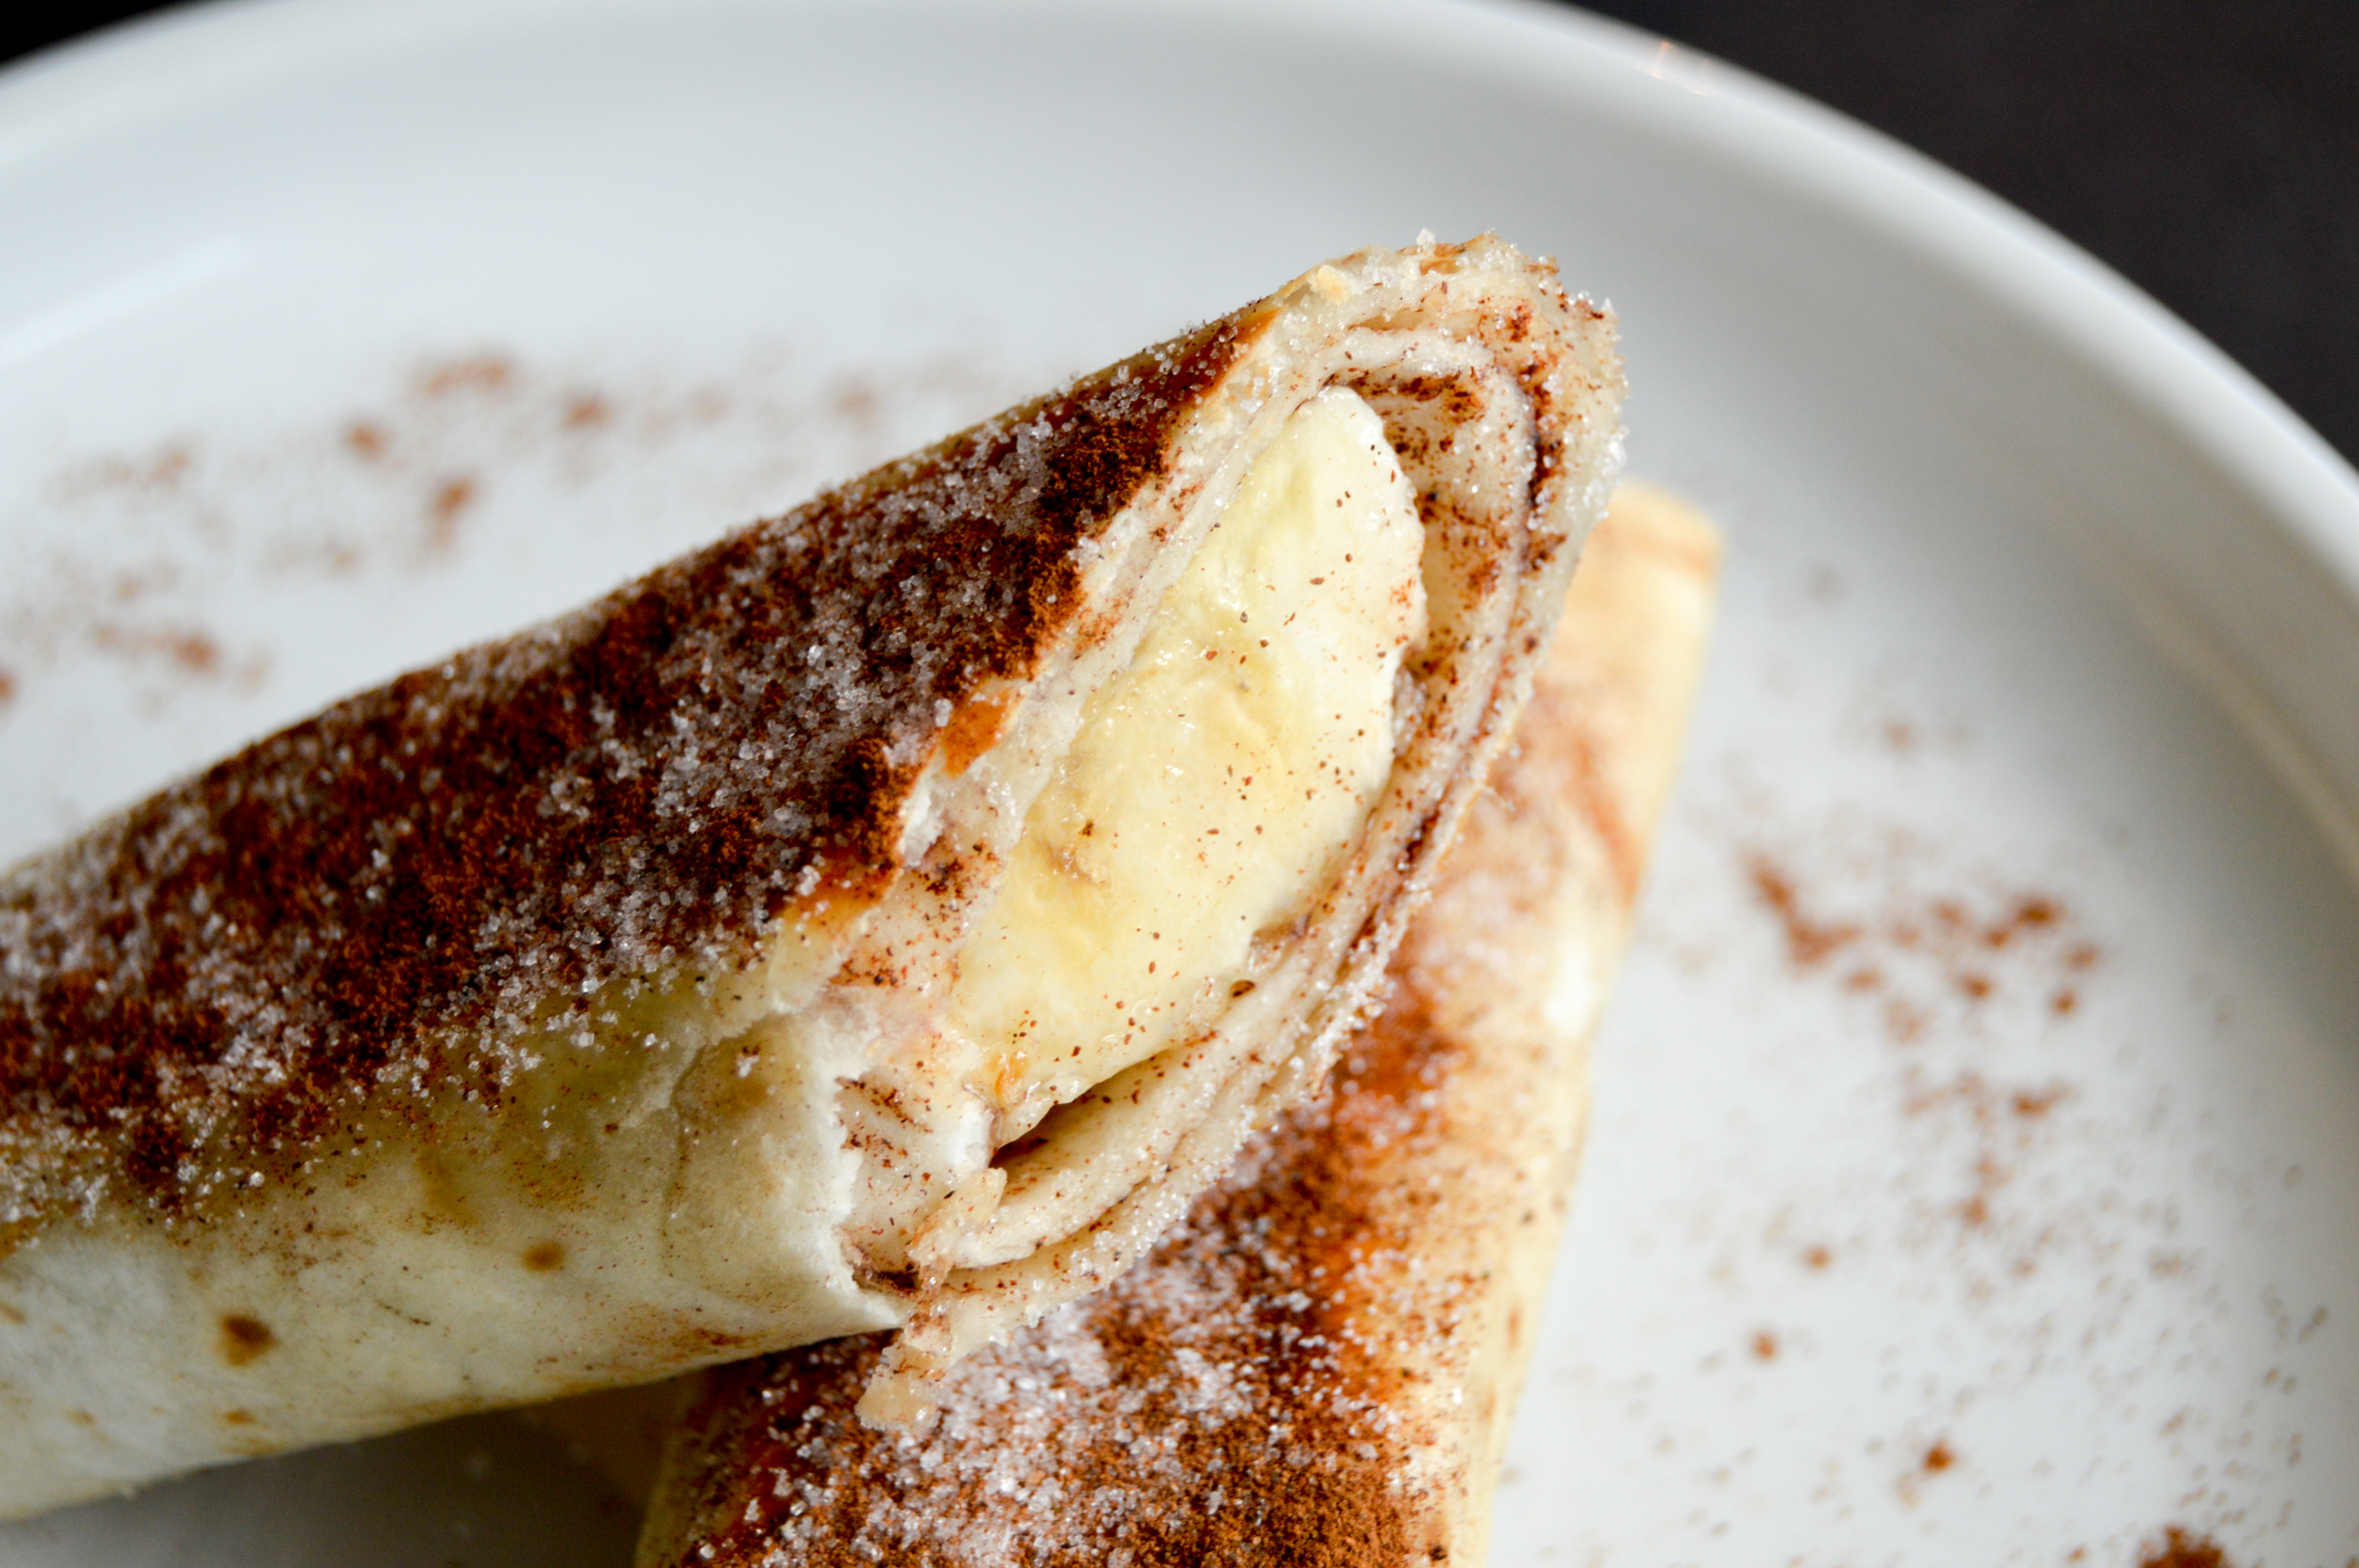 Banana cinnamon sugar tortilla roll ups recipe inspired by churros. These easy banana churro pinwheels make a tasty snack, appetizer, or treat for Cinco de Mayo. Simple 5 ingredient recipe that the kids will love! 